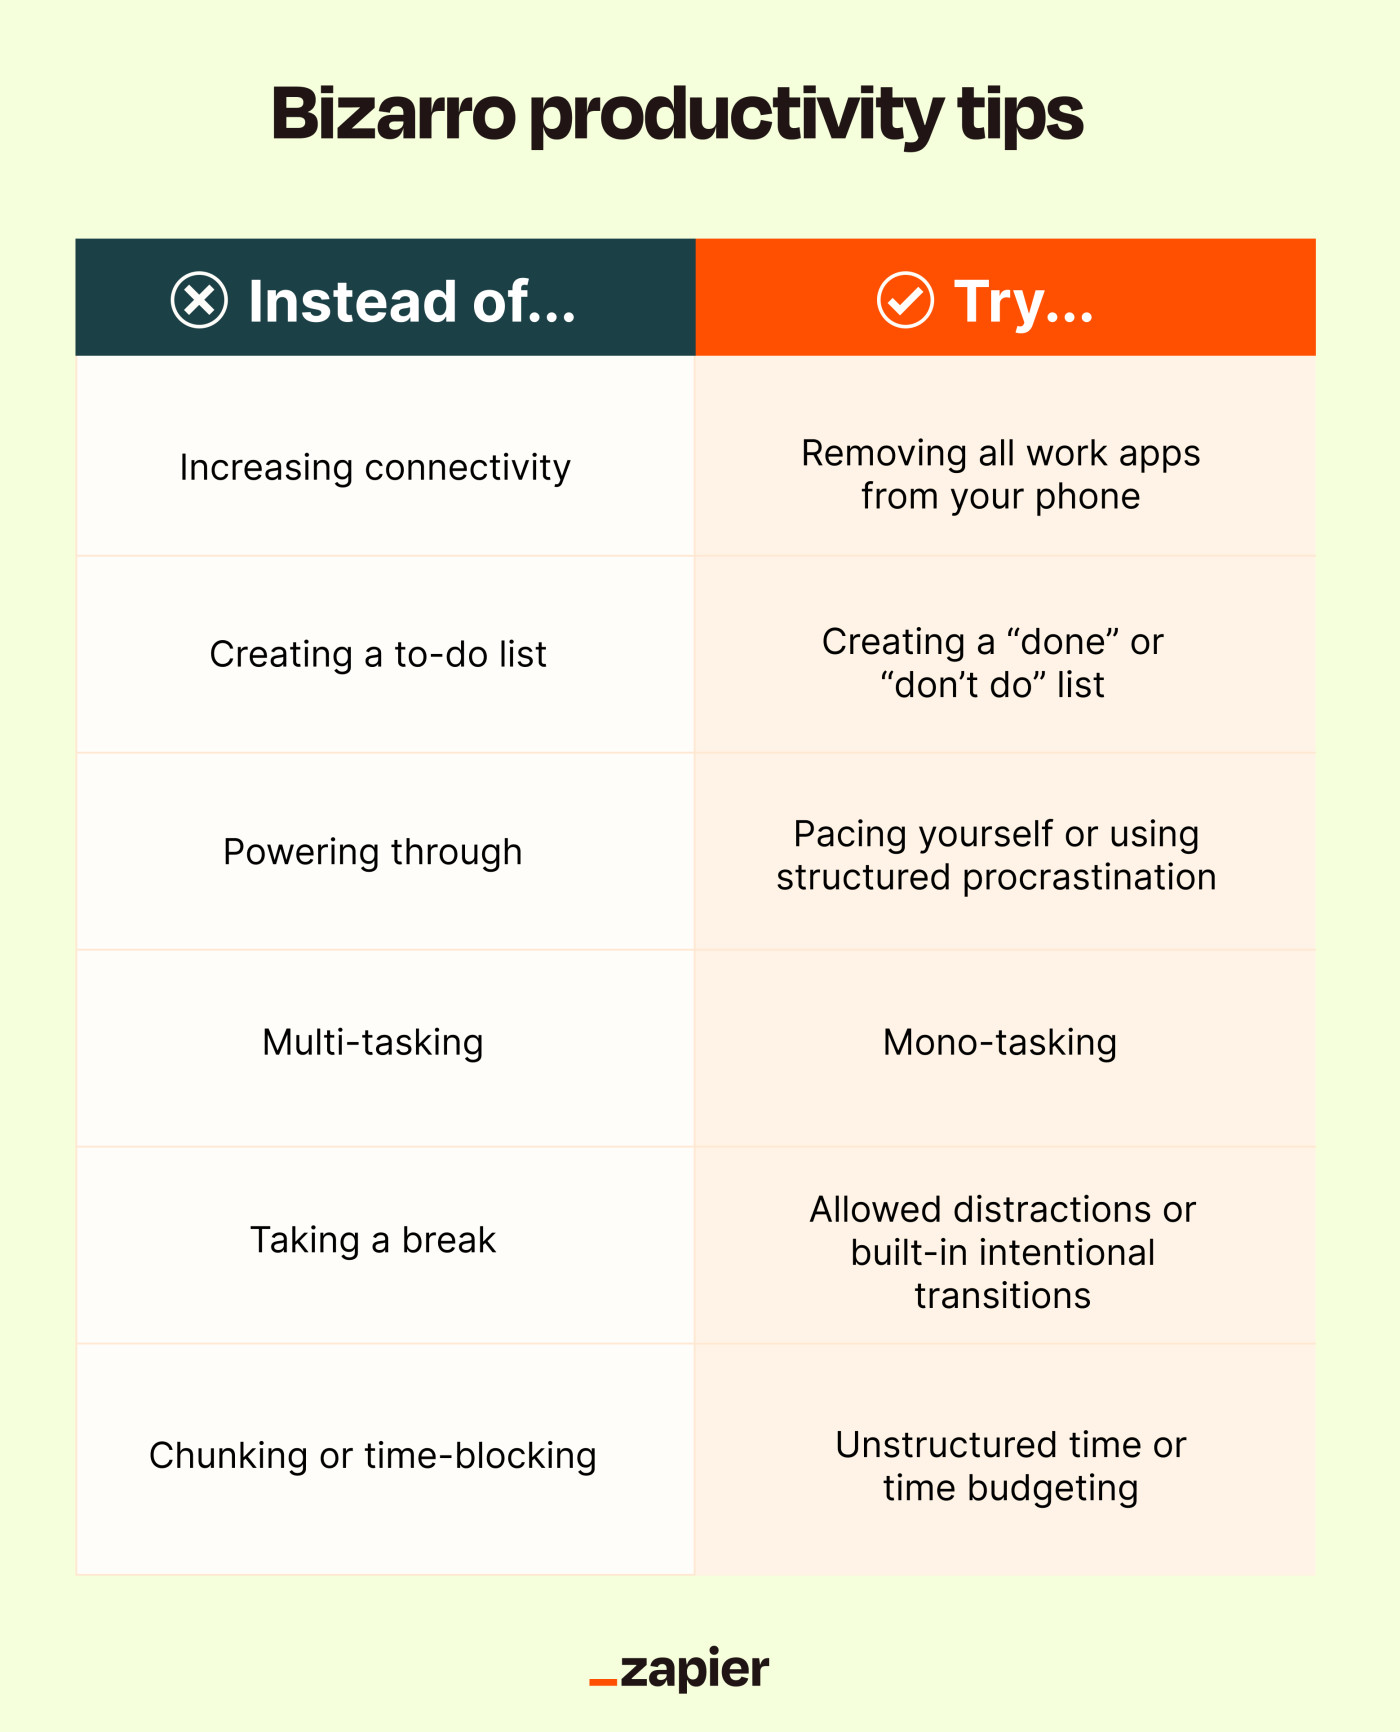 An infographic outlining the bizarro productivity tips